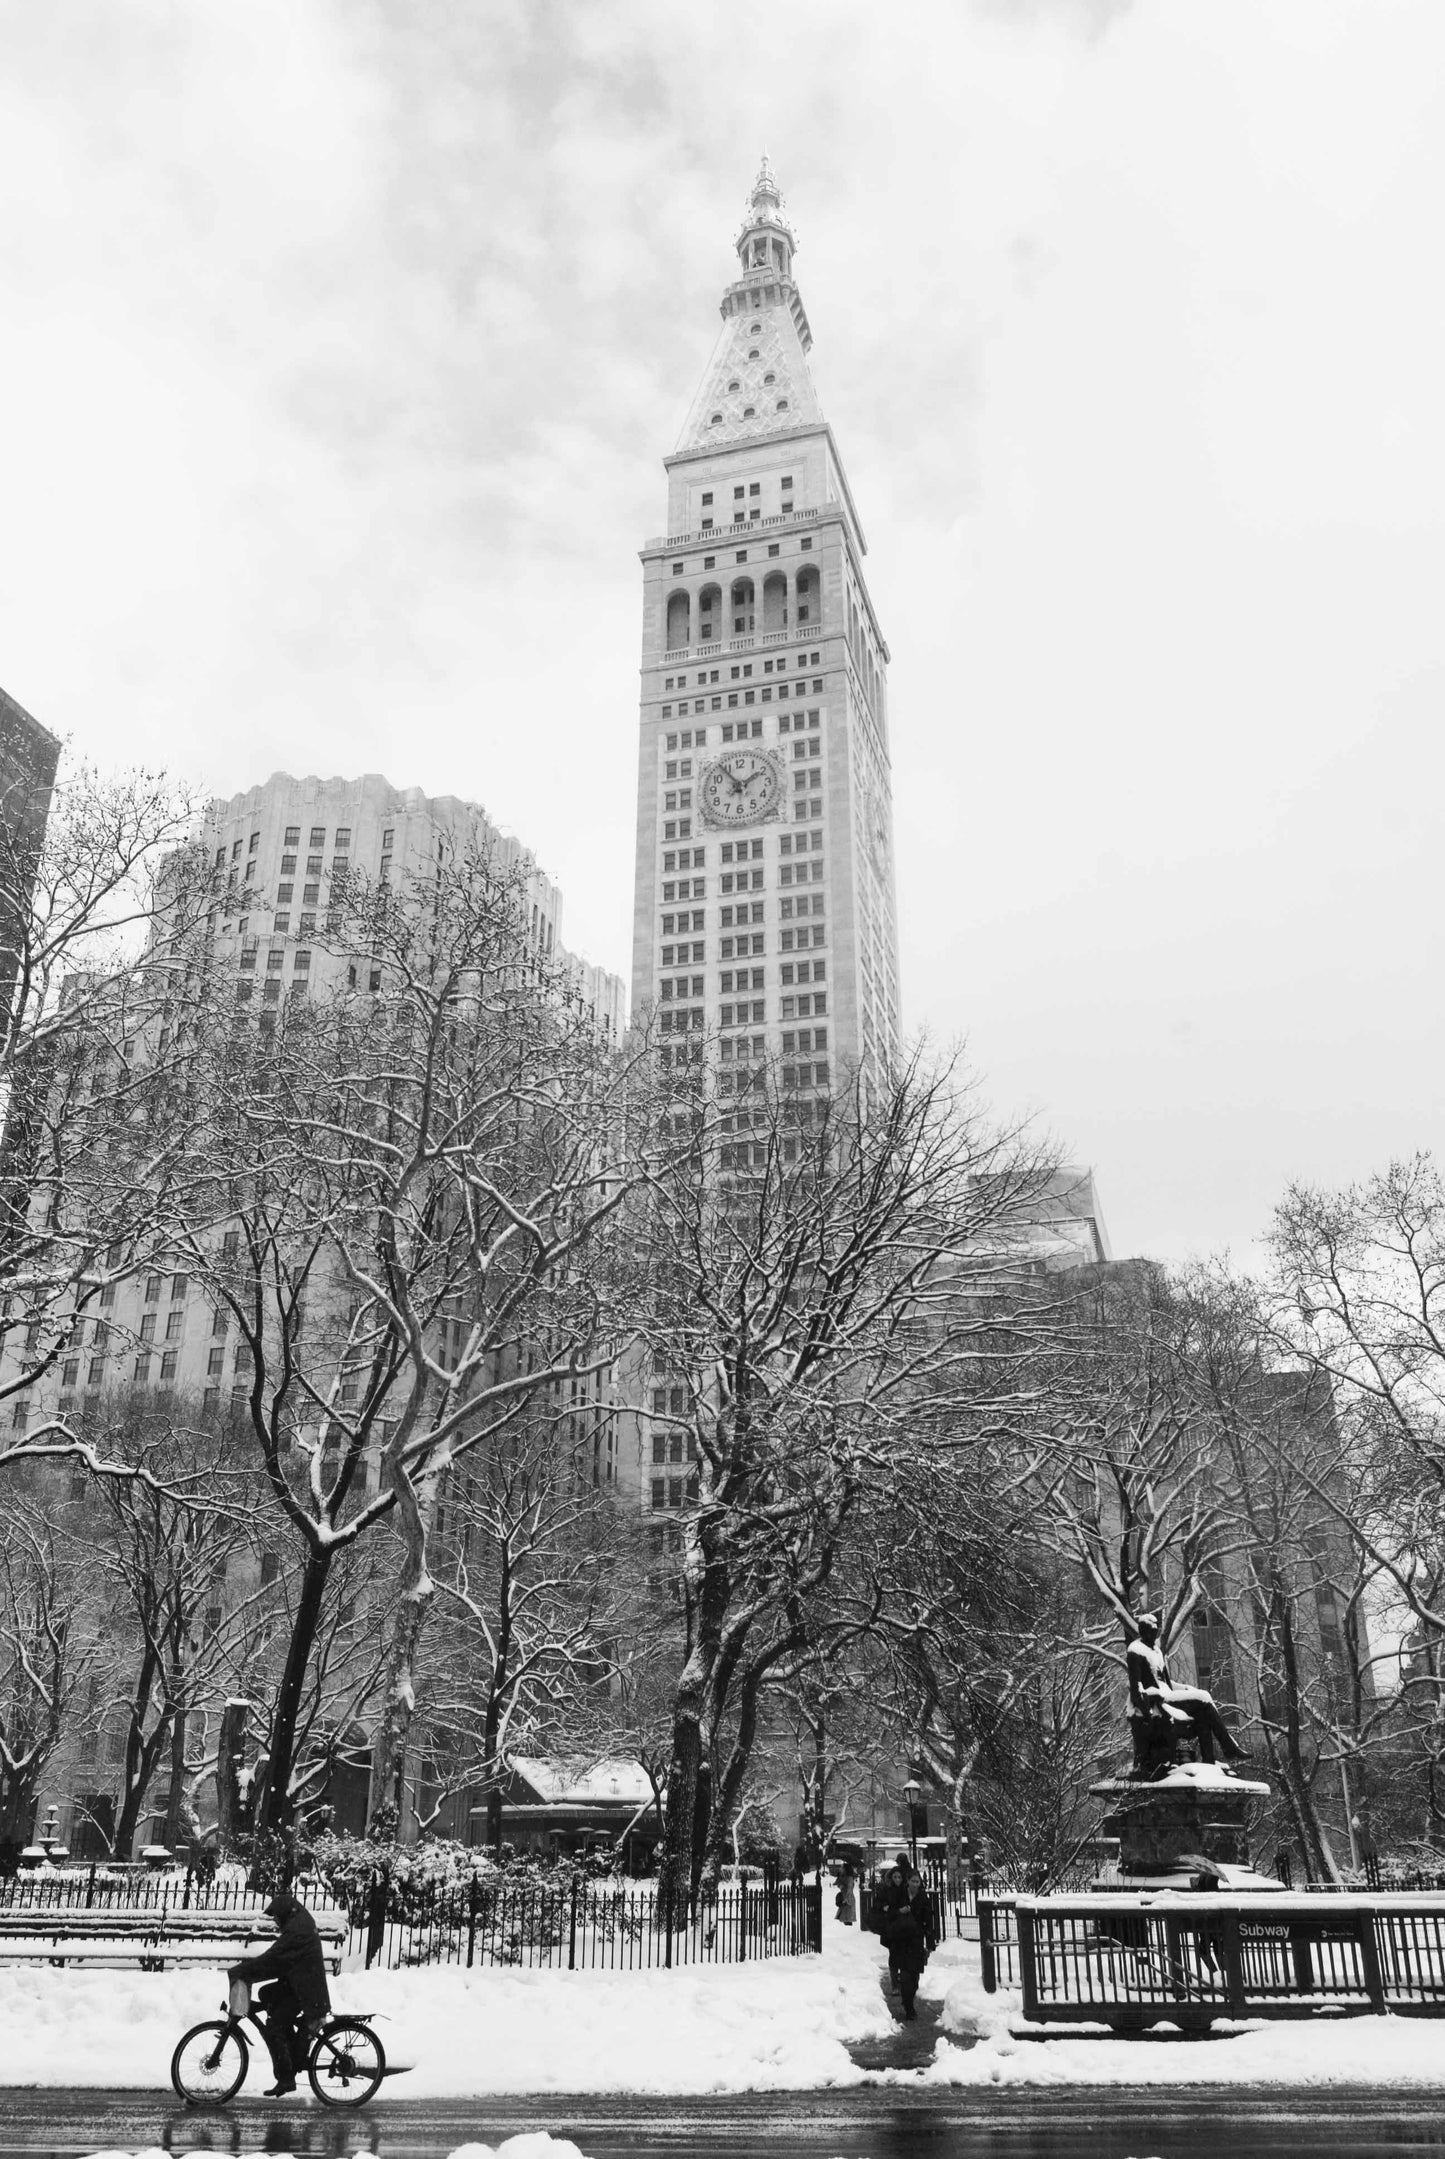 Alessandra Mattanza | BUILDING POWER, Metropolitan Life Insurance Company Tower, New York The iconic tower at 1 Madison Avenue between 23rd and 24th Streets on a snowy winters day. Available as an art print or as a photographic print on acrylic glass.